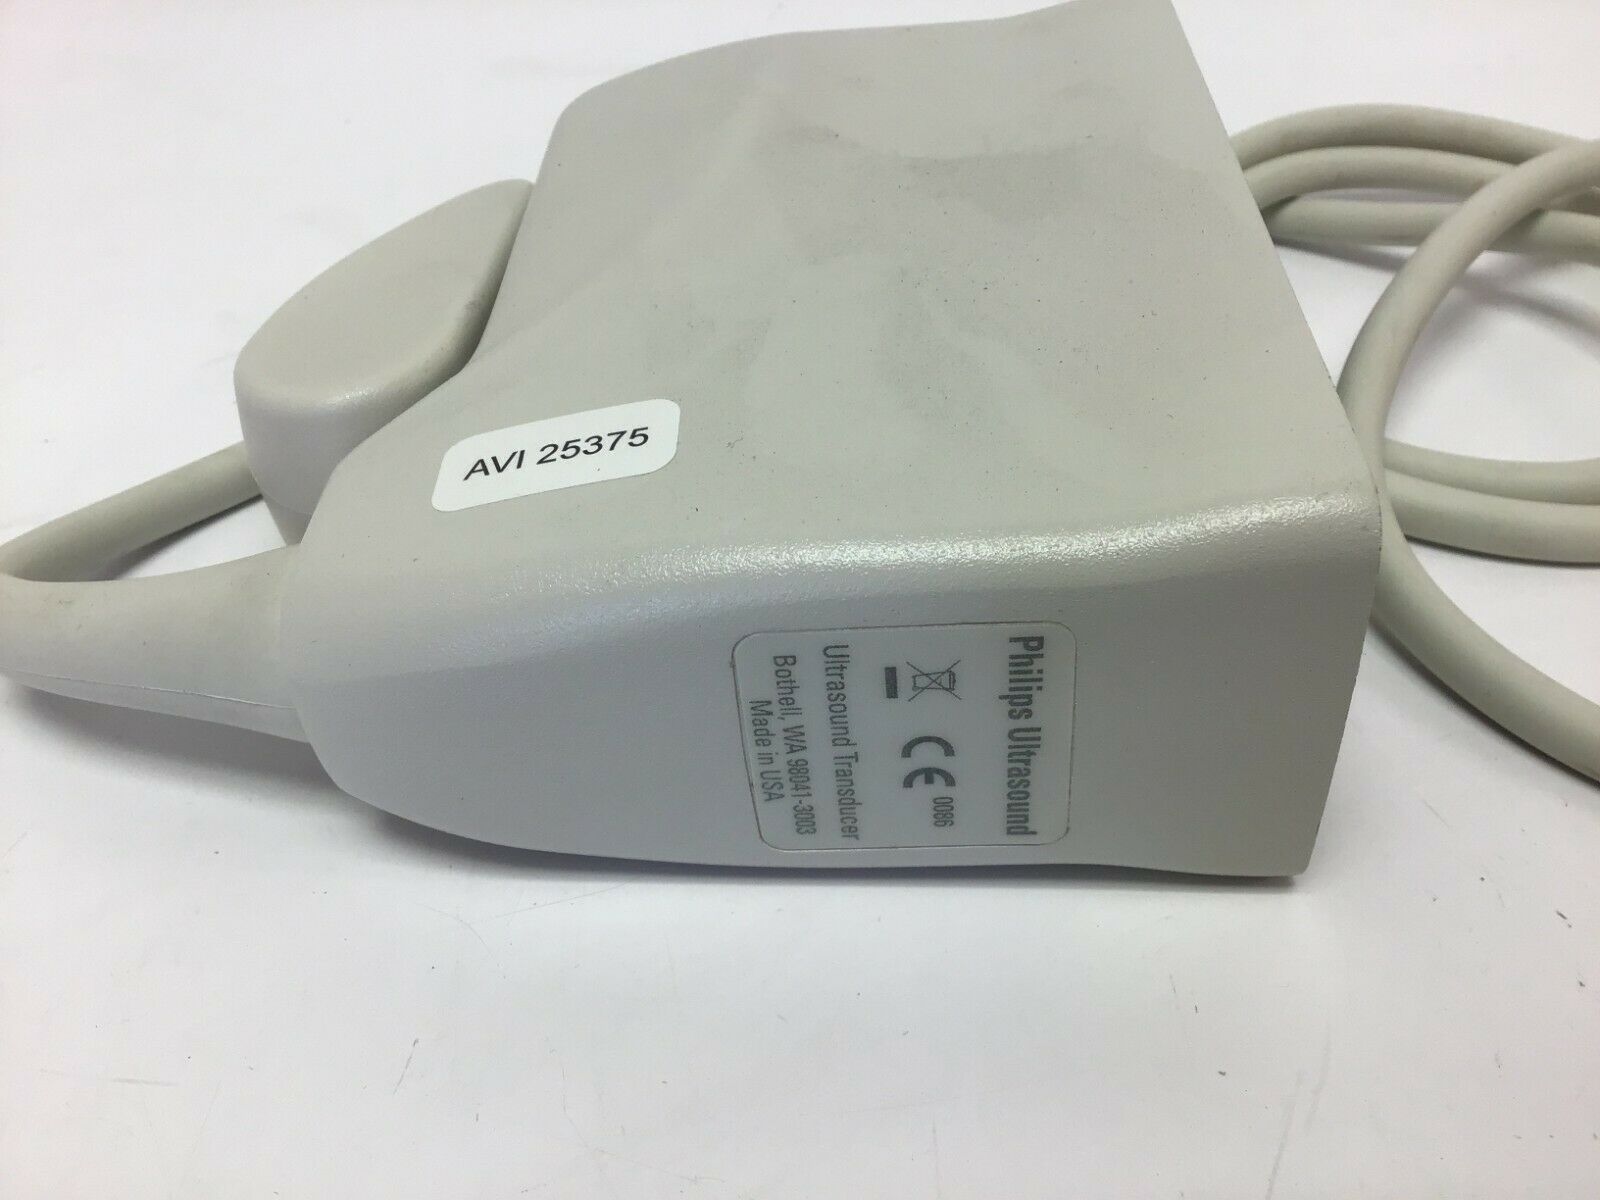 Philips X3-1 Phased Array Ultrasound Transducer Probe IPx-7 DIAGNOSTIC ULTRASOUND MACHINES FOR SALE